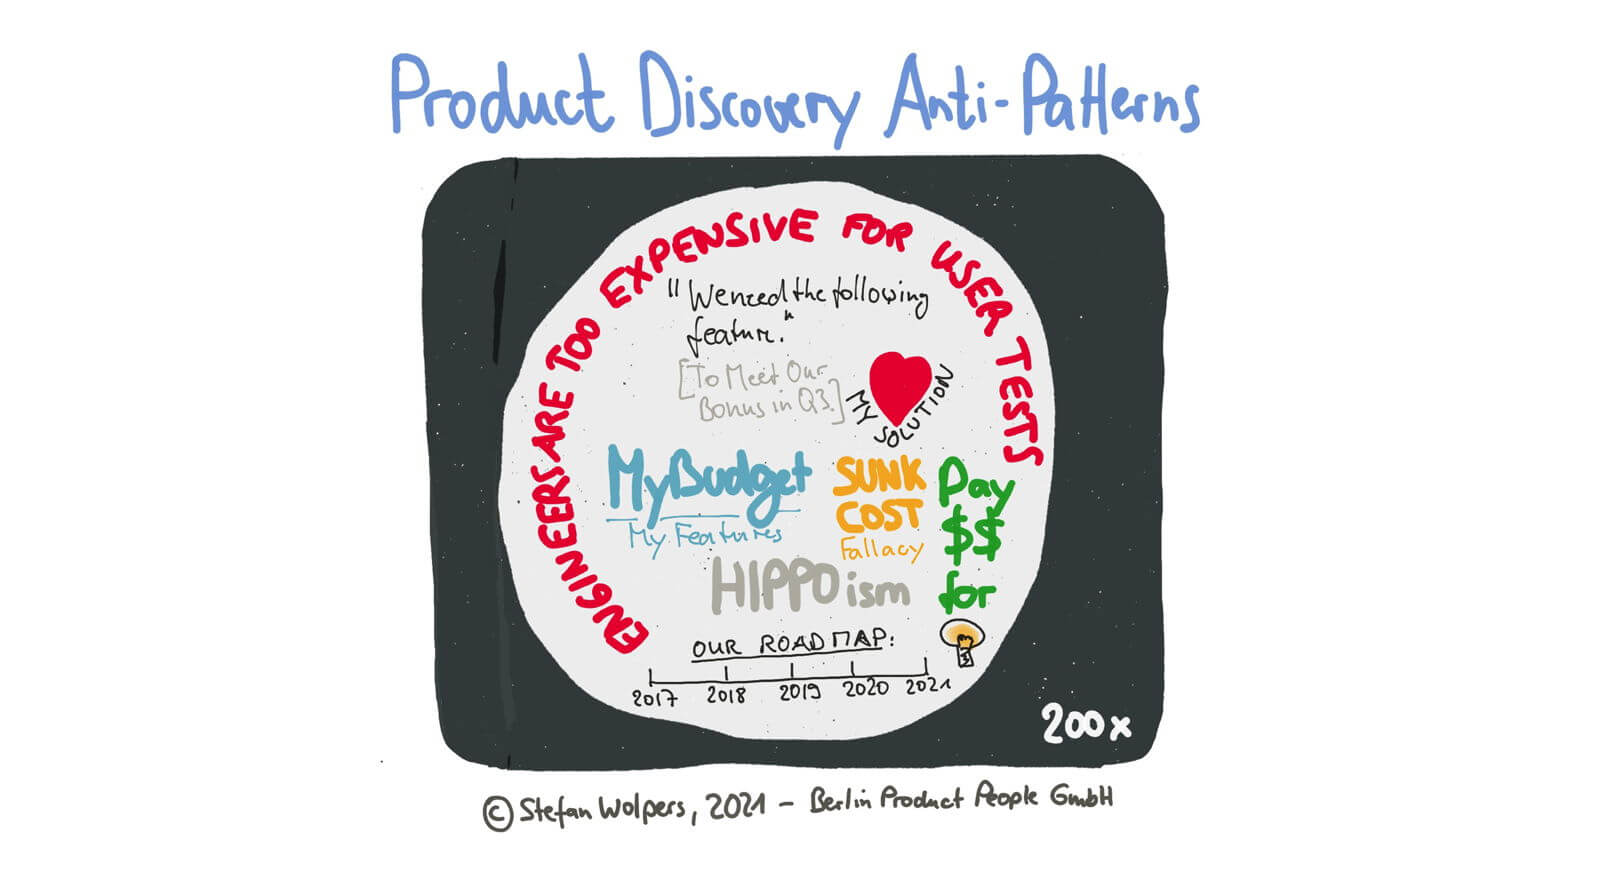 Product Discovery Anti-Patterns — Berlin Product People GmbH